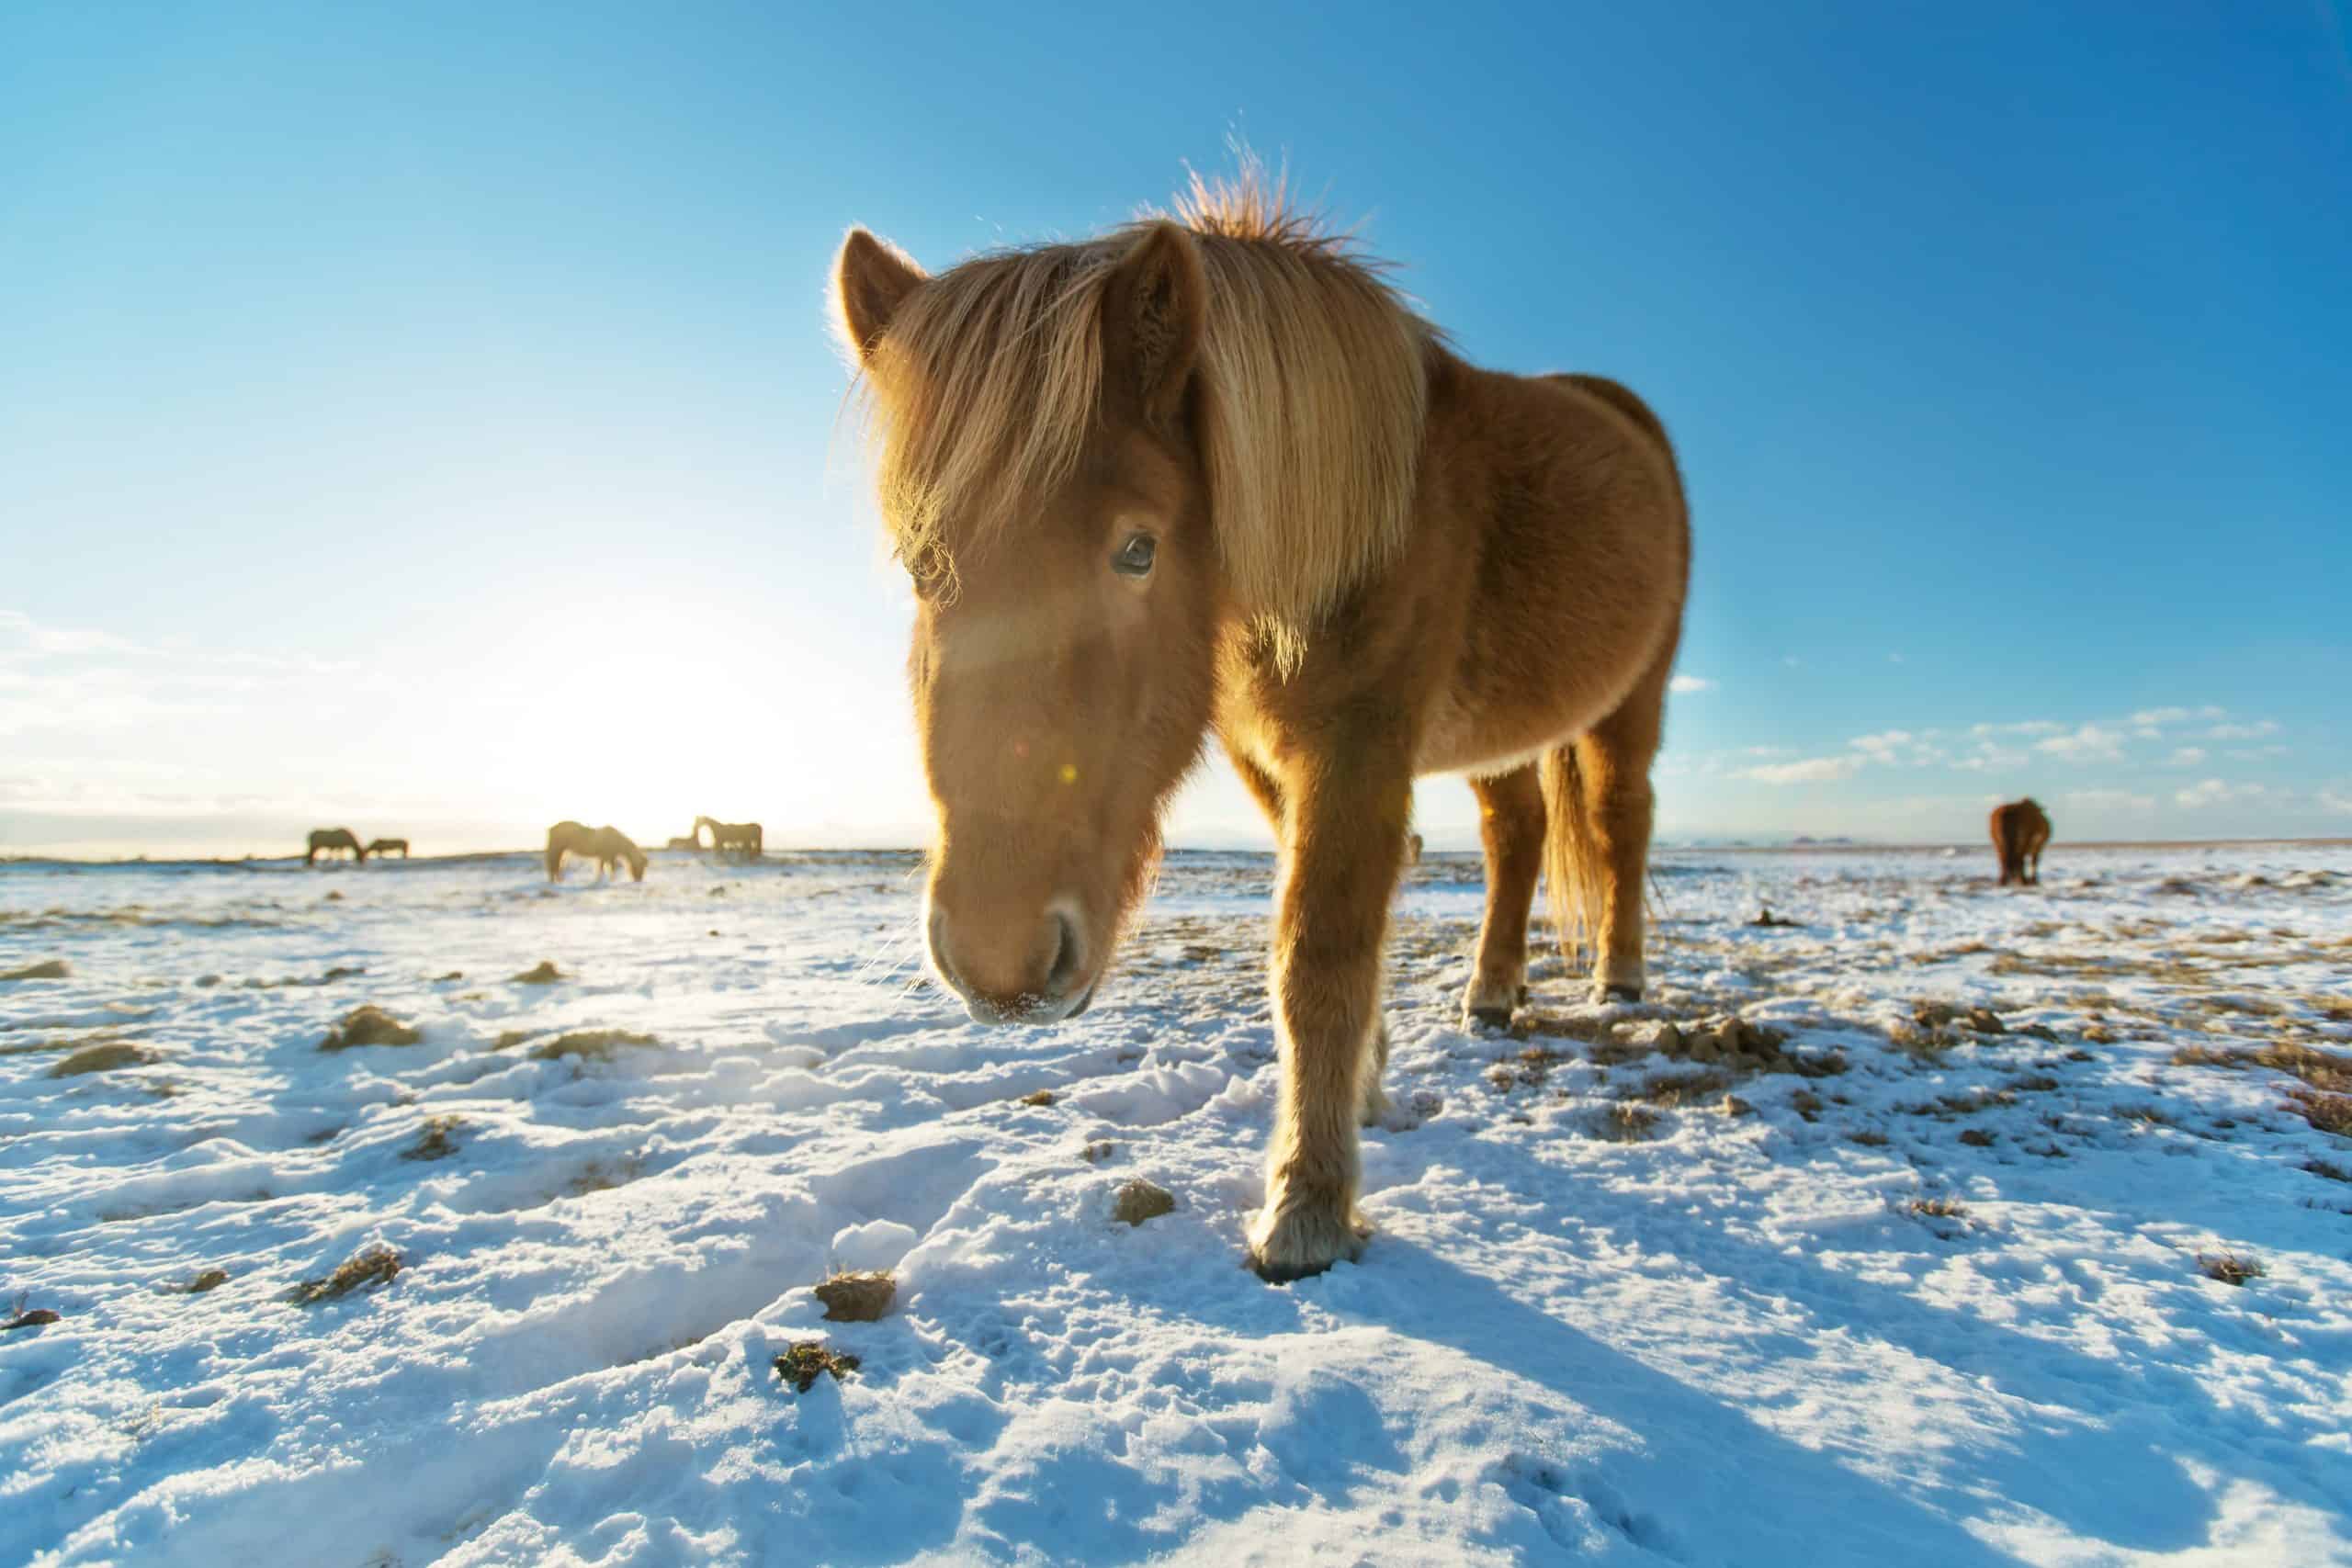  horses in winter landscape. Iconic symbol of Iceland fauna, tourist point of interest